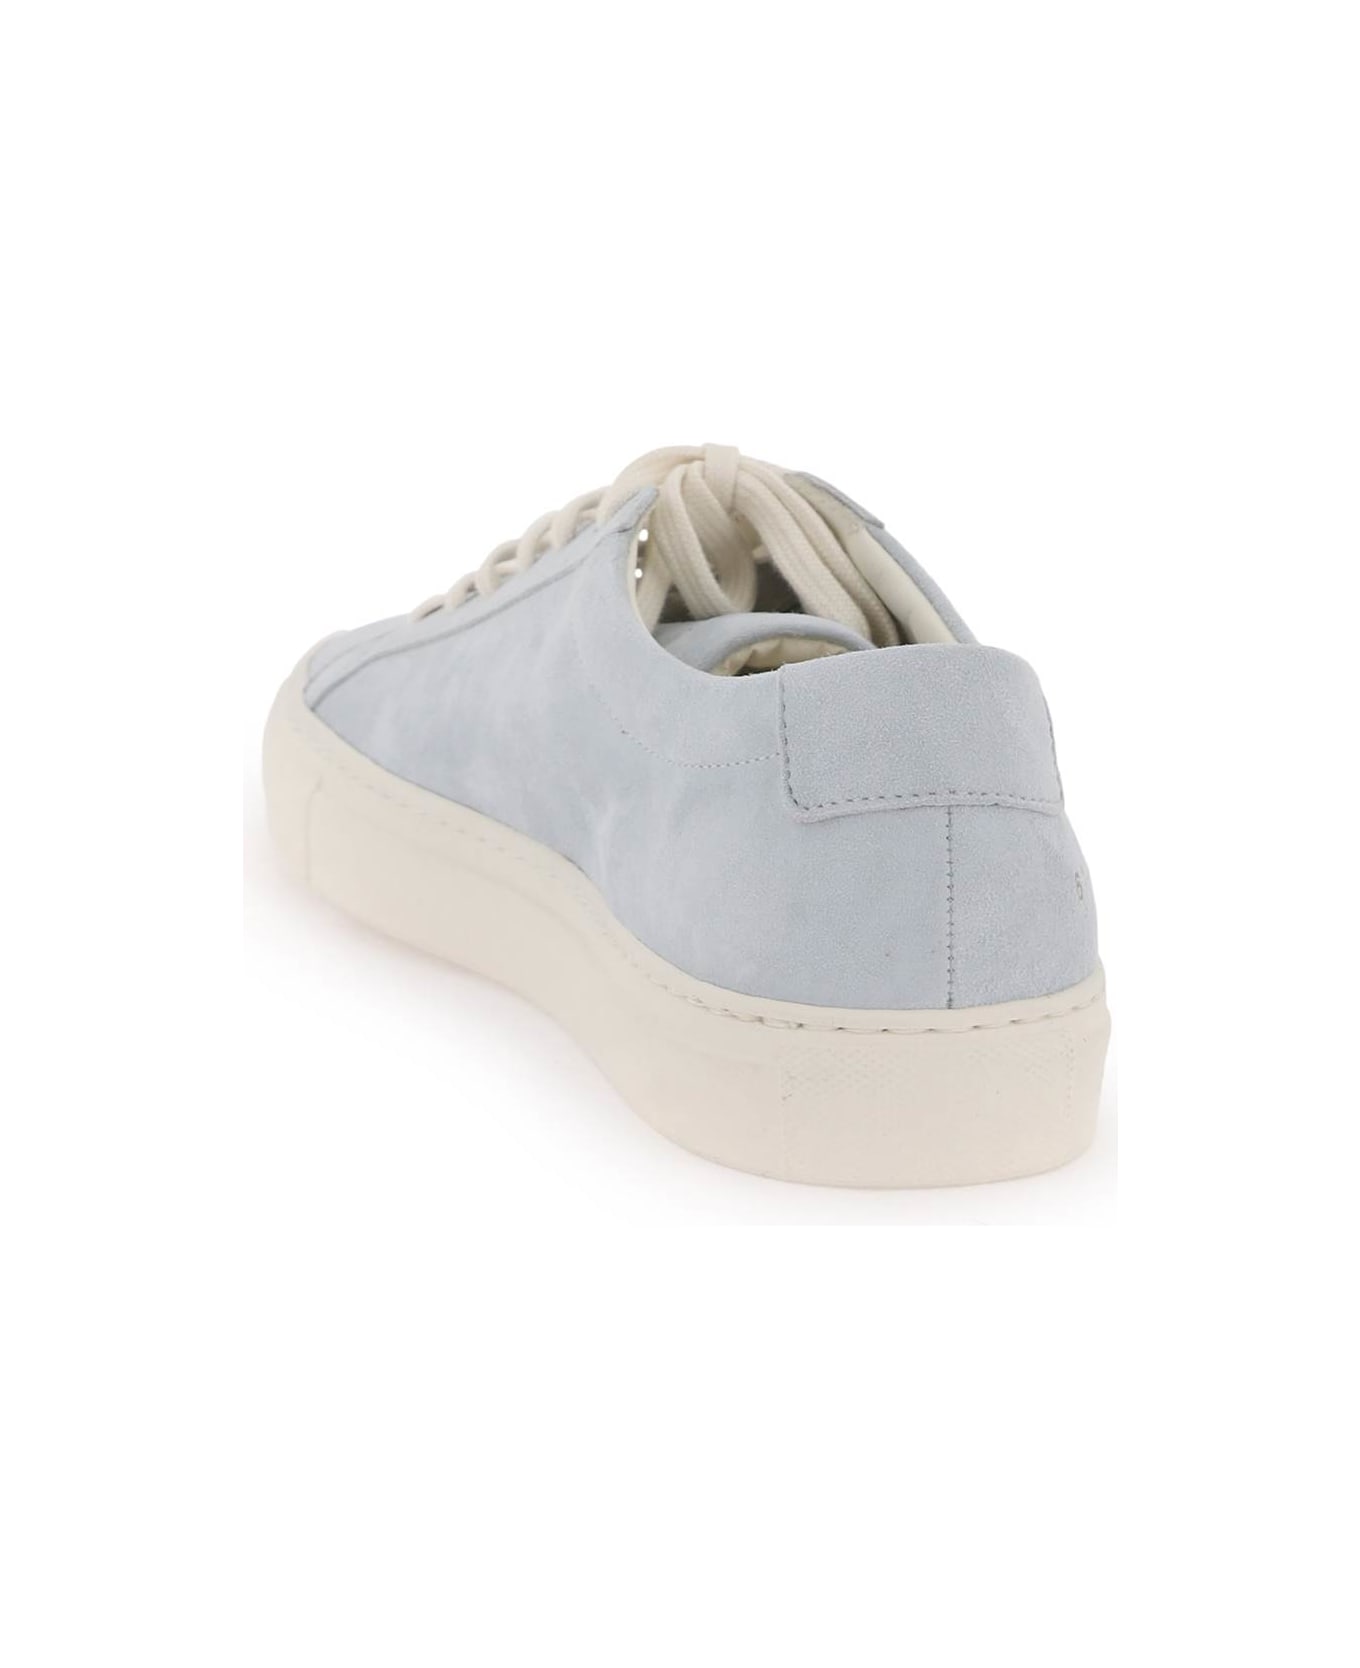 Common Projects 'contrast Achilles' Baby Blue Suede Sneakers - BABY BLUE (Light blue)